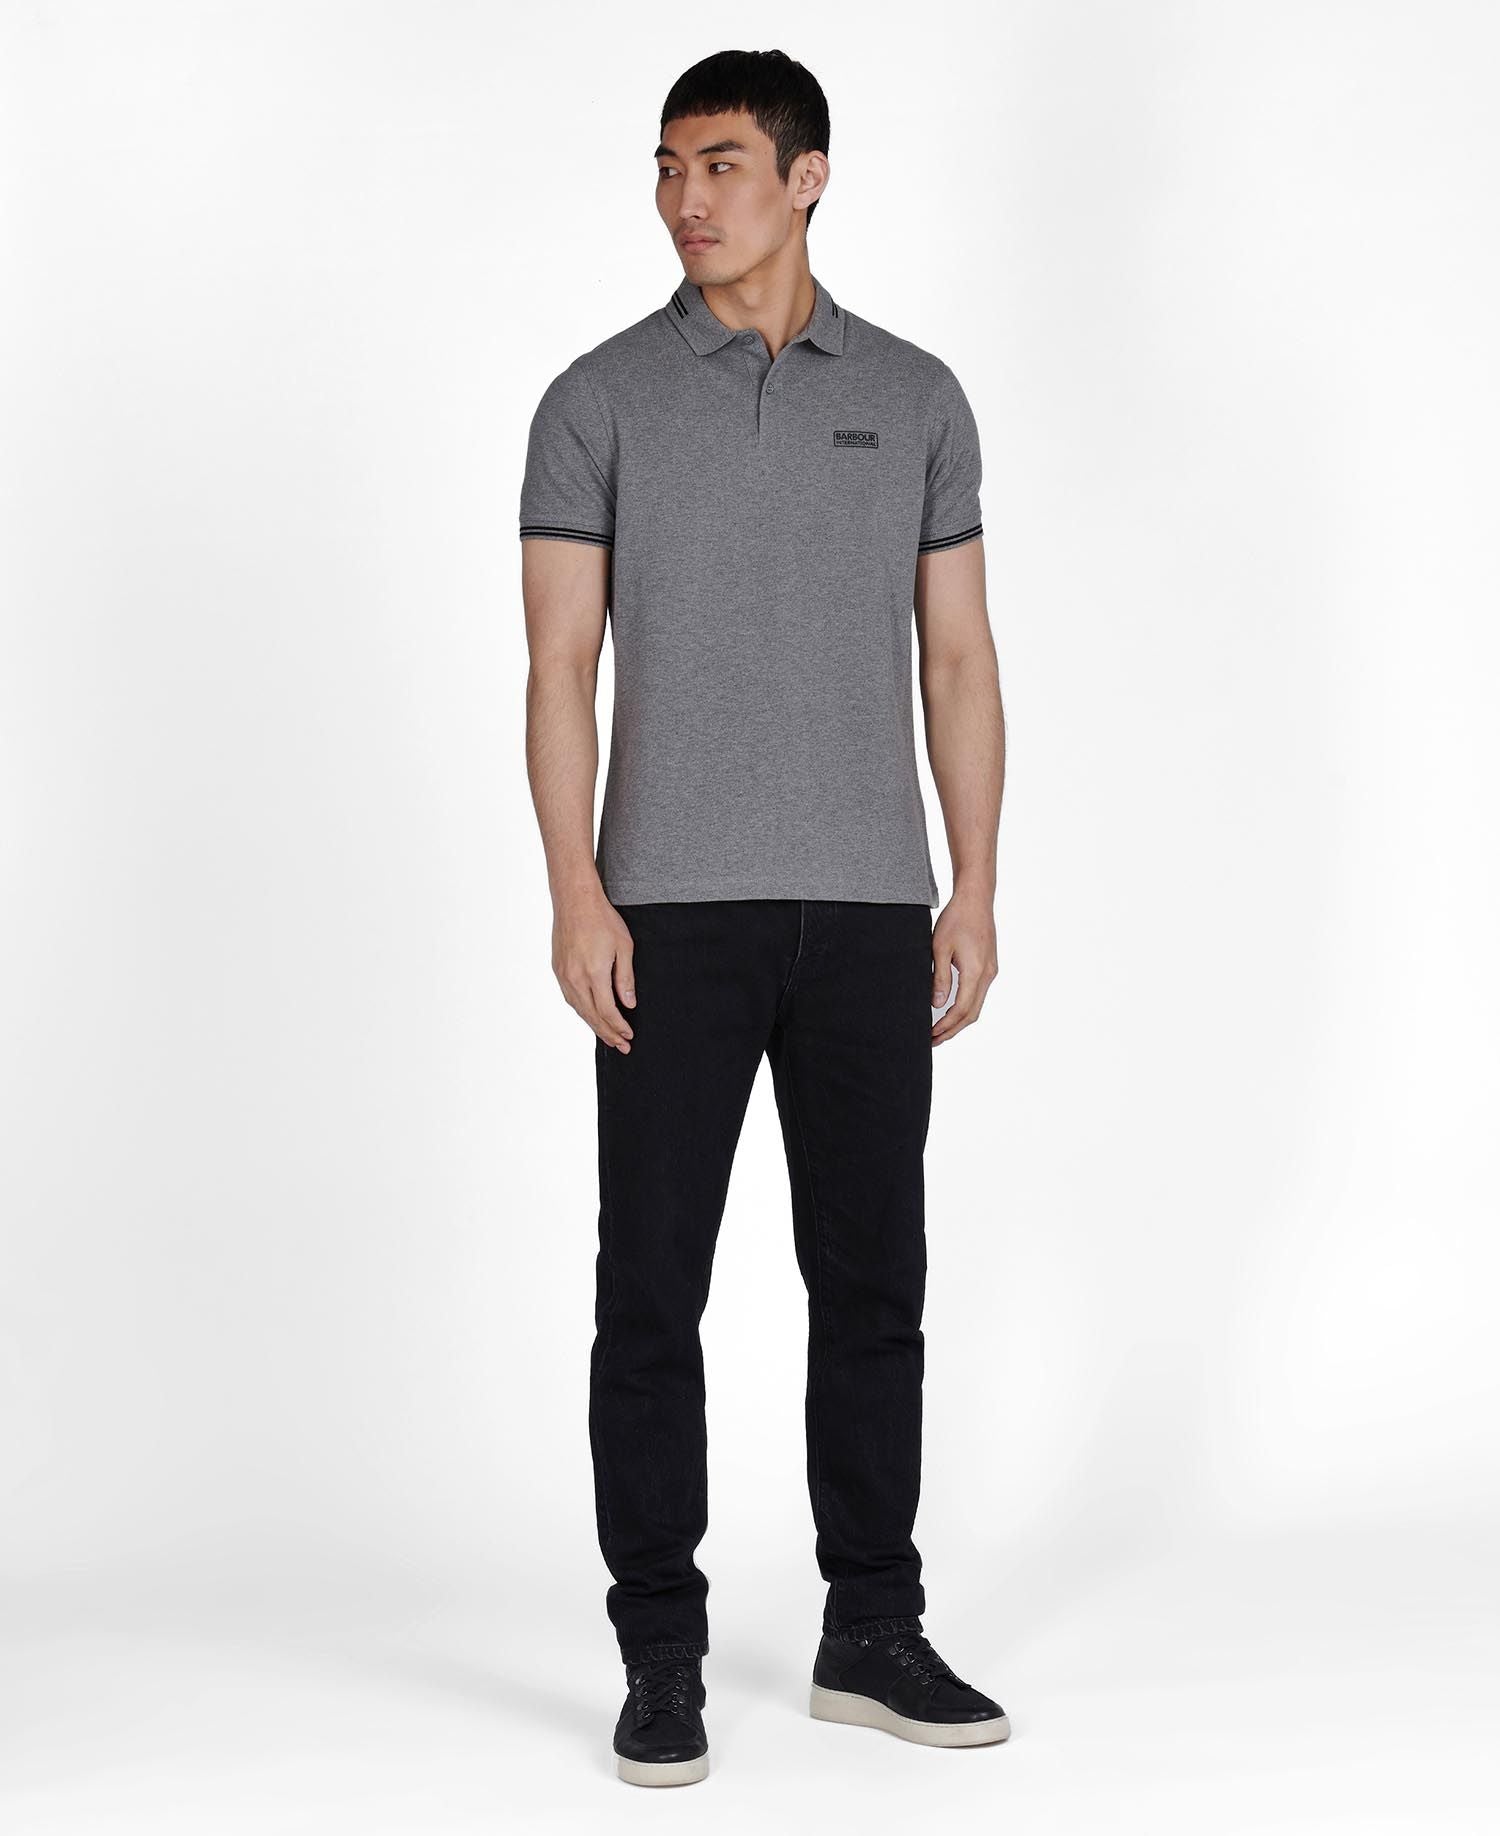 BARBOUR INTL ESSENTIAL TIPPED POLO